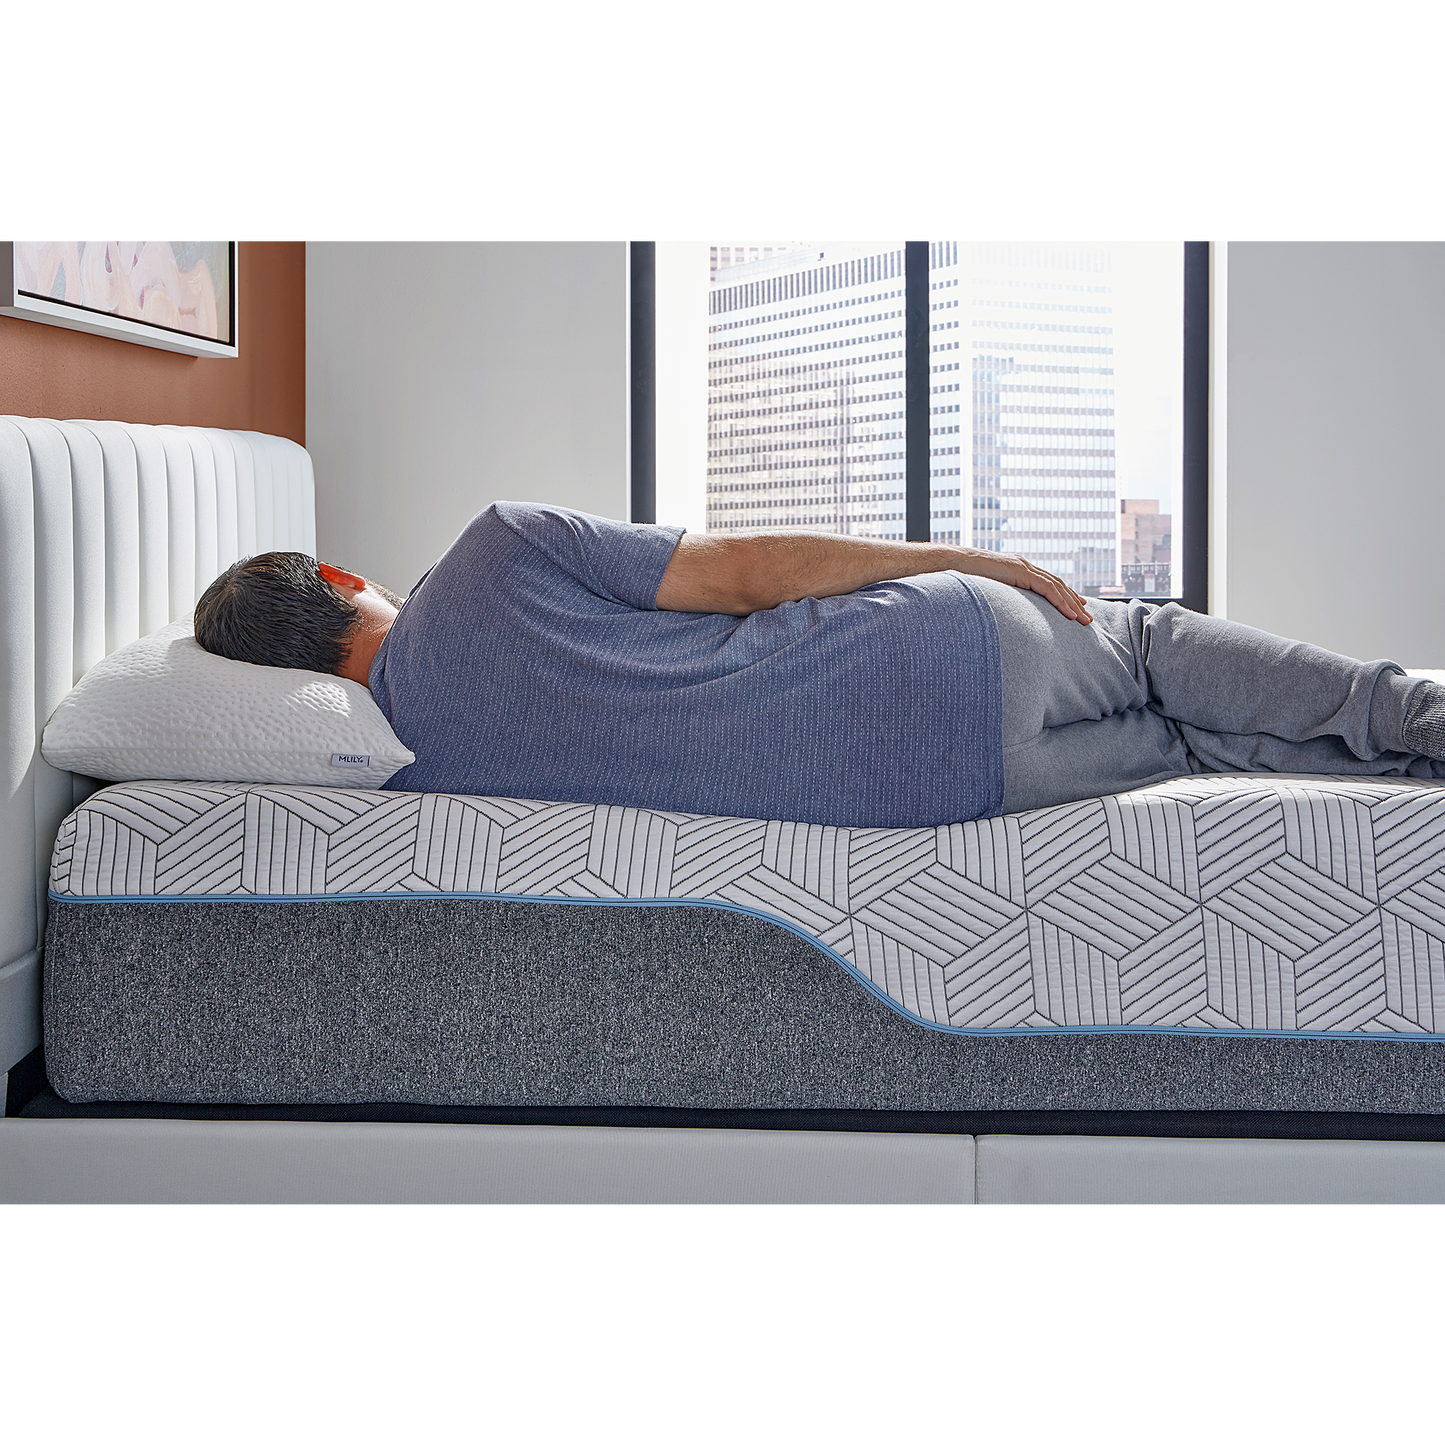 Harmony Chill 2.0 13" Memory Foam Mattress With Advanced Temperature Regulation Inside Of A Bedroom With A Man Sleeping On His Side